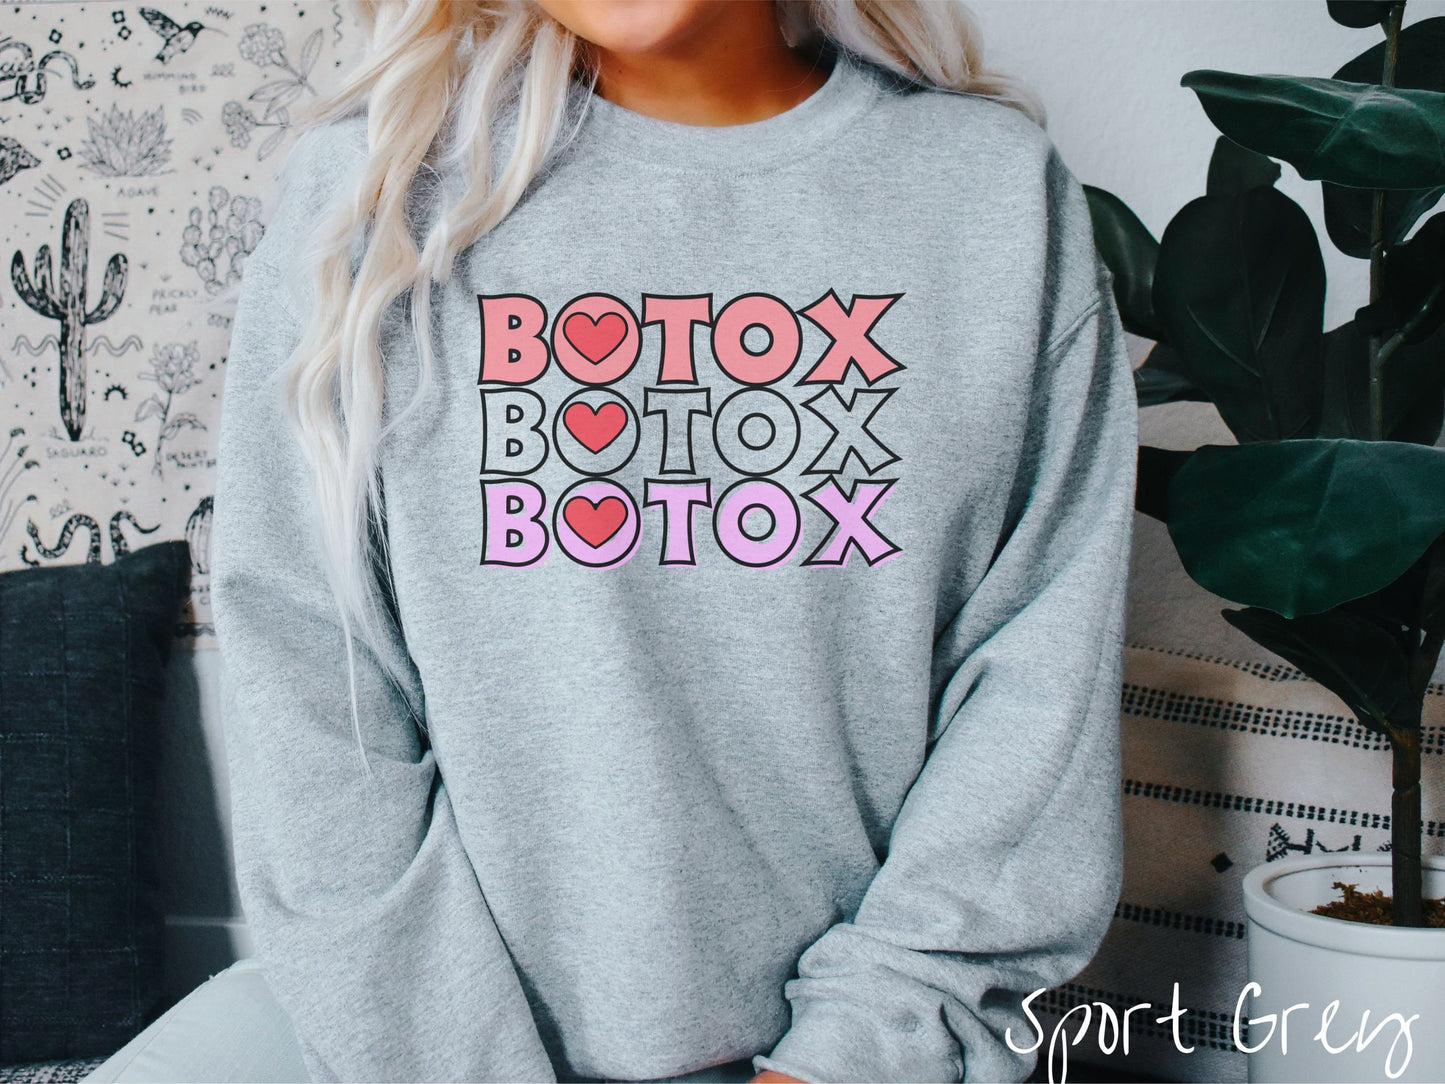 A woman wearing a cute sport grey colored sweatshirt with the word Botox listed three times in different shades of pink and red, with red hearts inside the first letter O in Botox.